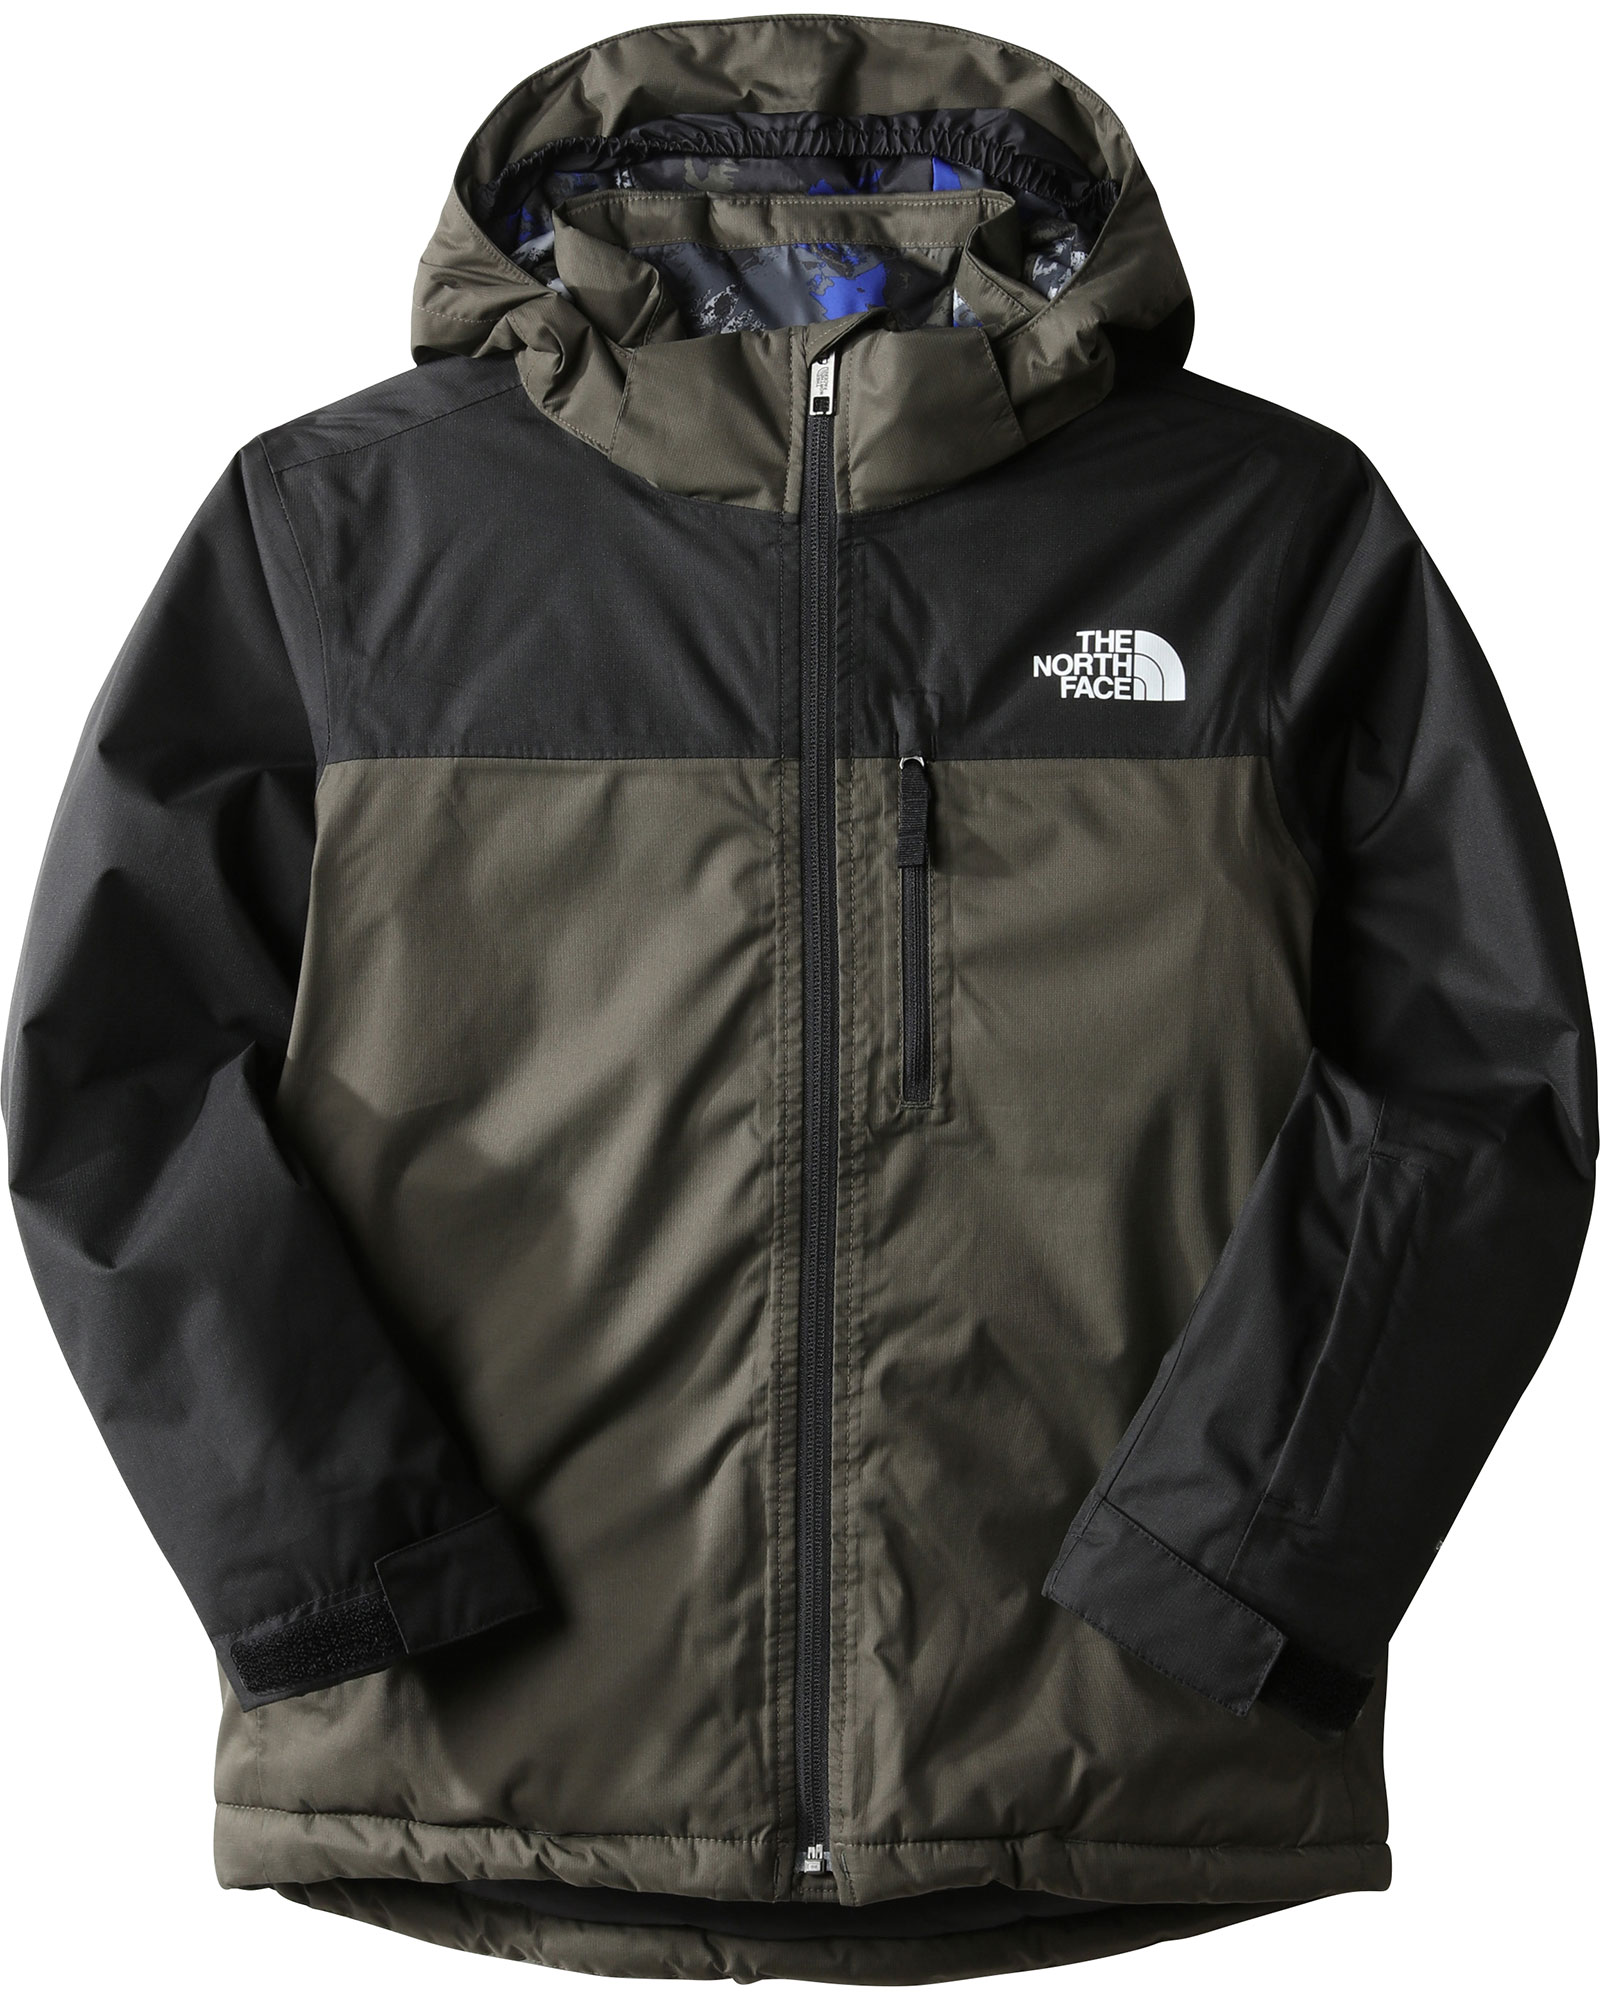 The North Face Teen Snowquest Plus Kids’ Insulated Jacket - New Taupe Green XS